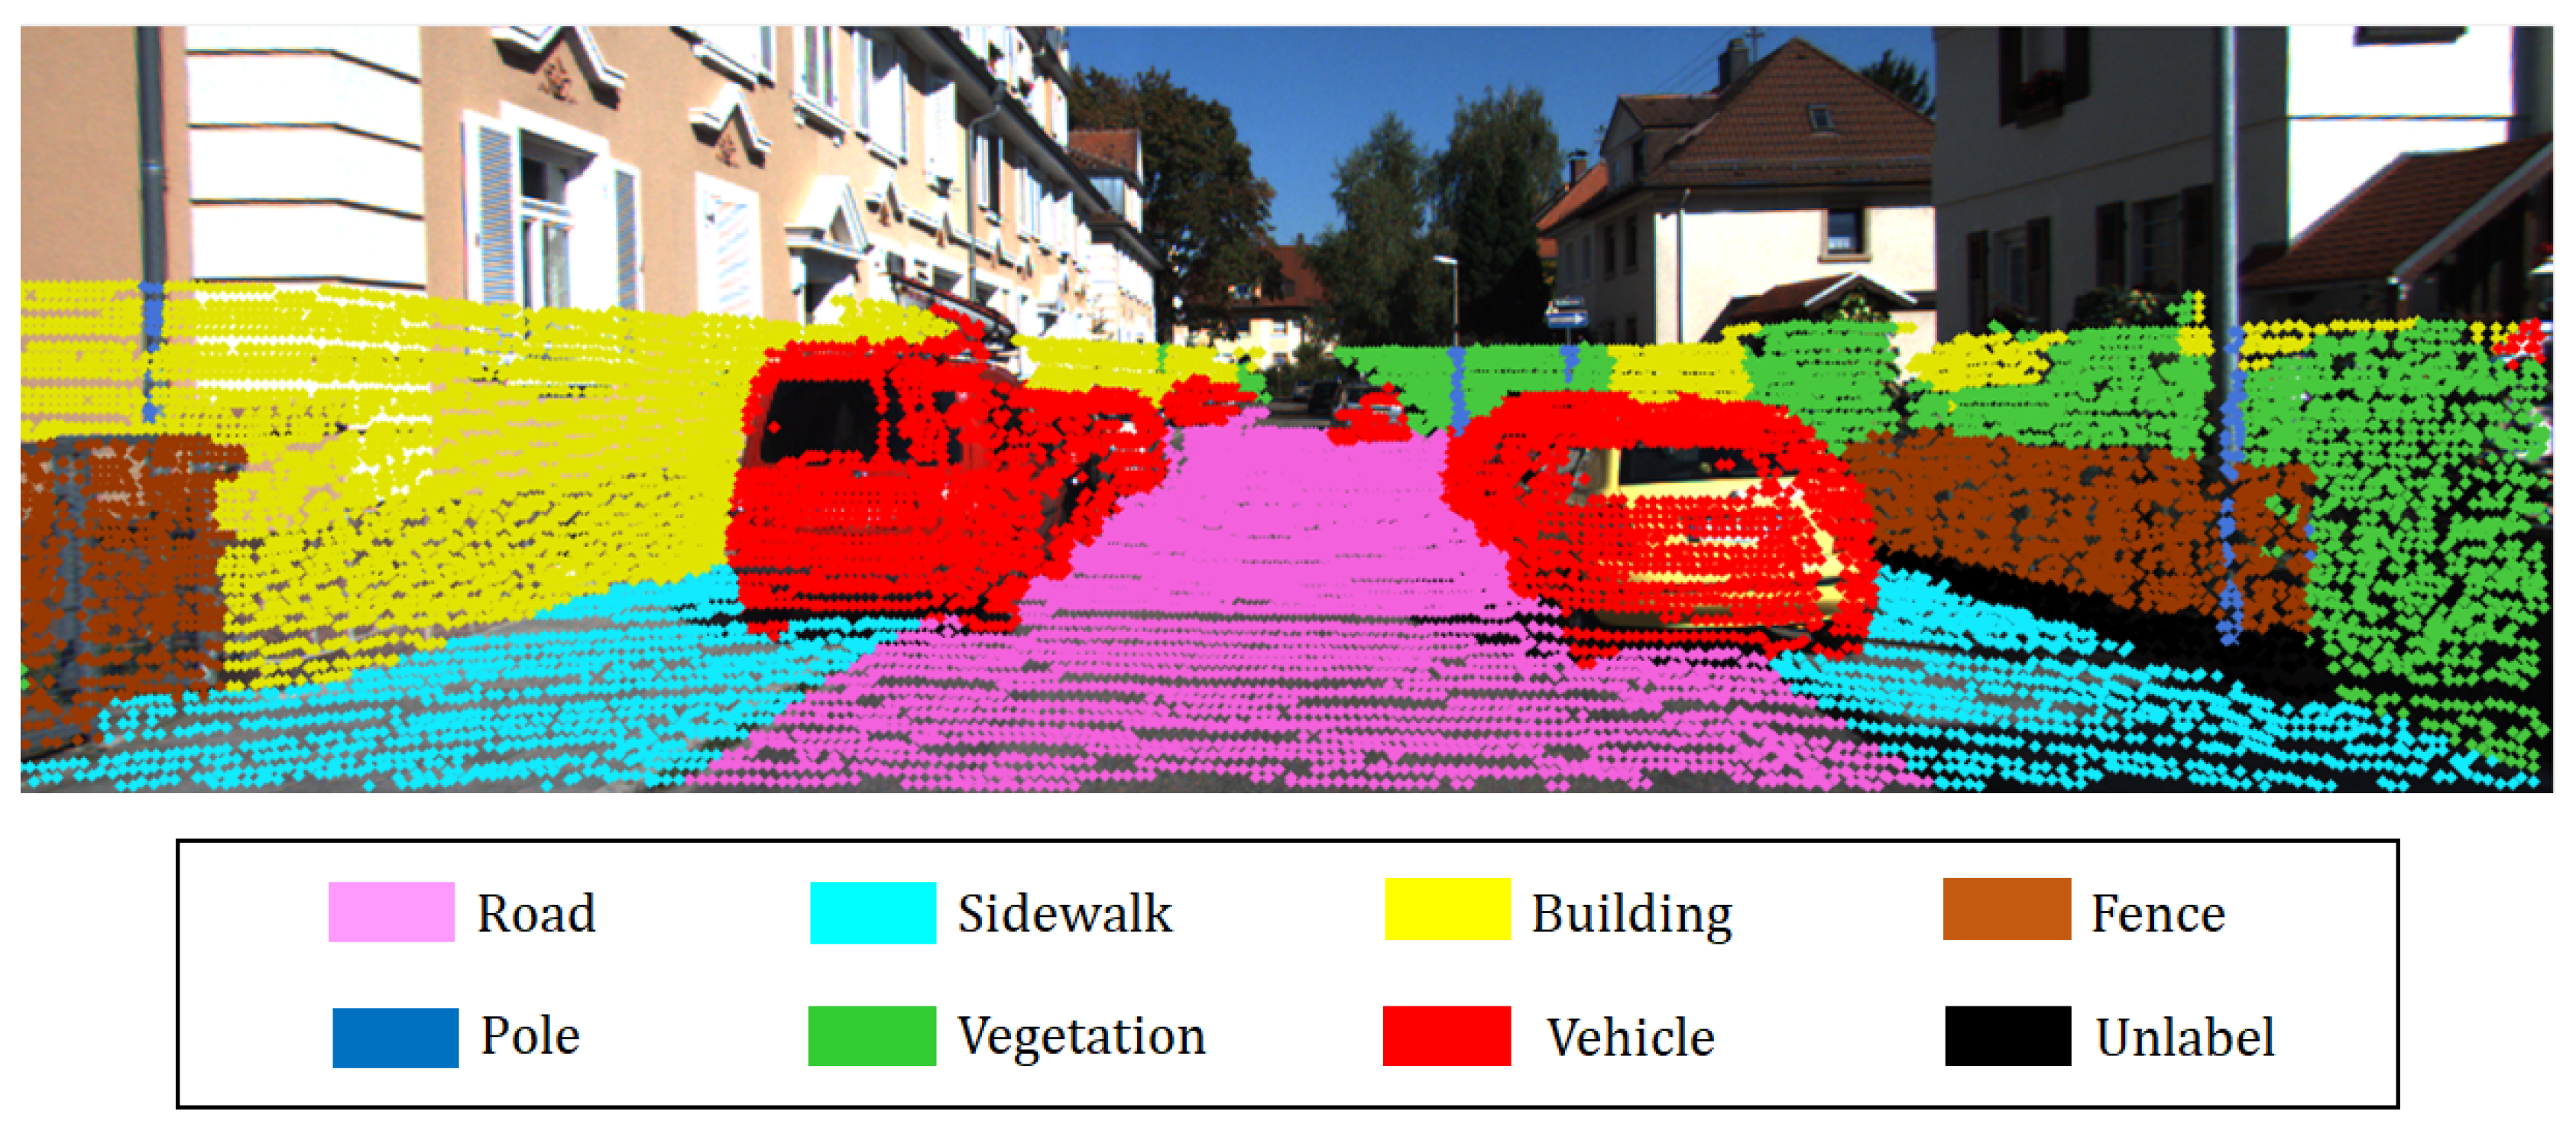 Image result for lidar example car 3d map labelled